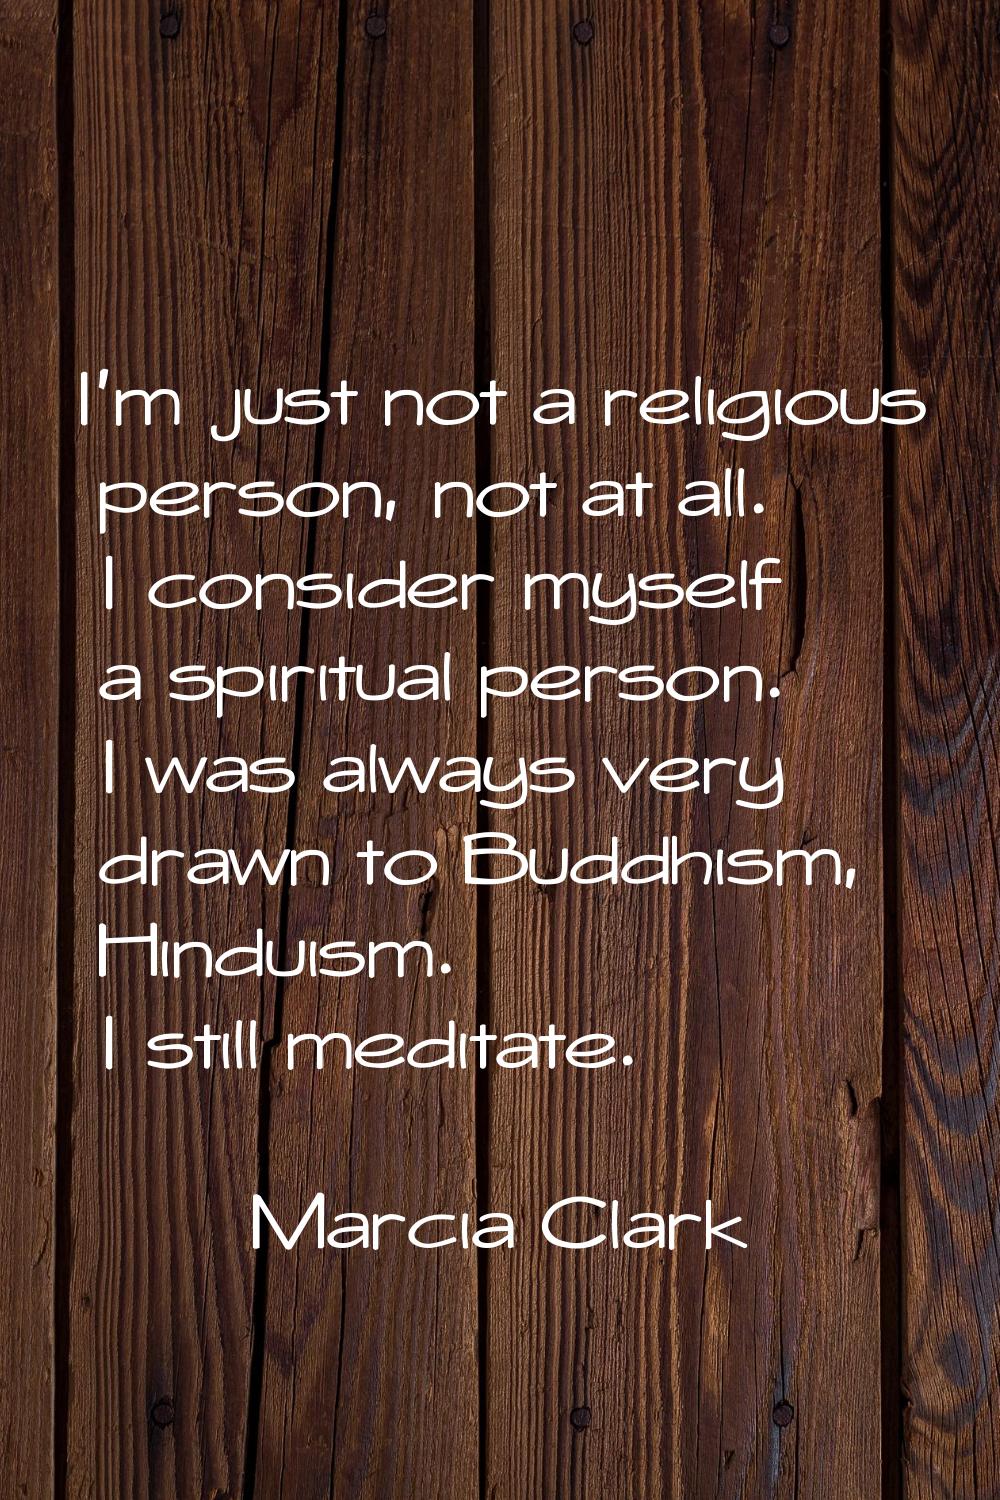 I'm just not a religious person, not at all. I consider myself a spiritual person. I was always ver